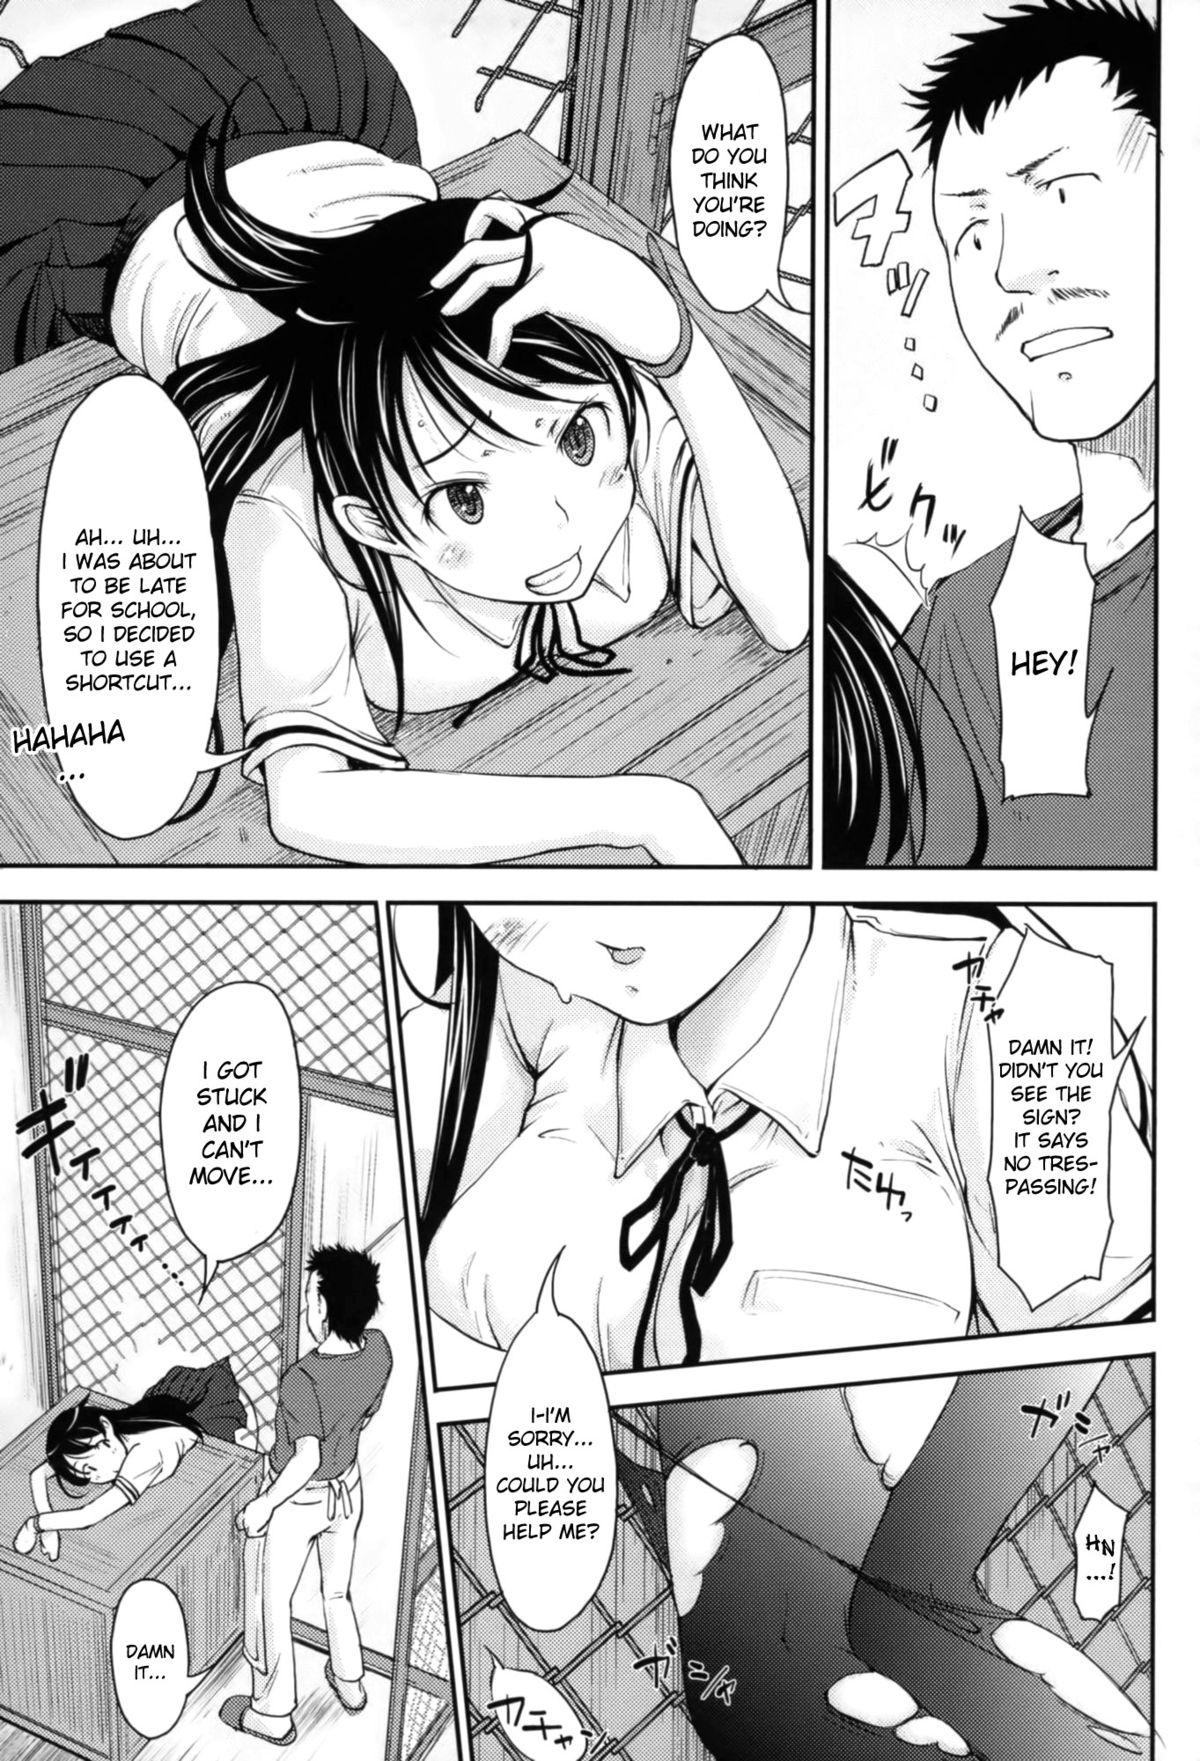 The Chikamichi | Shortcut Missionary - Page 5